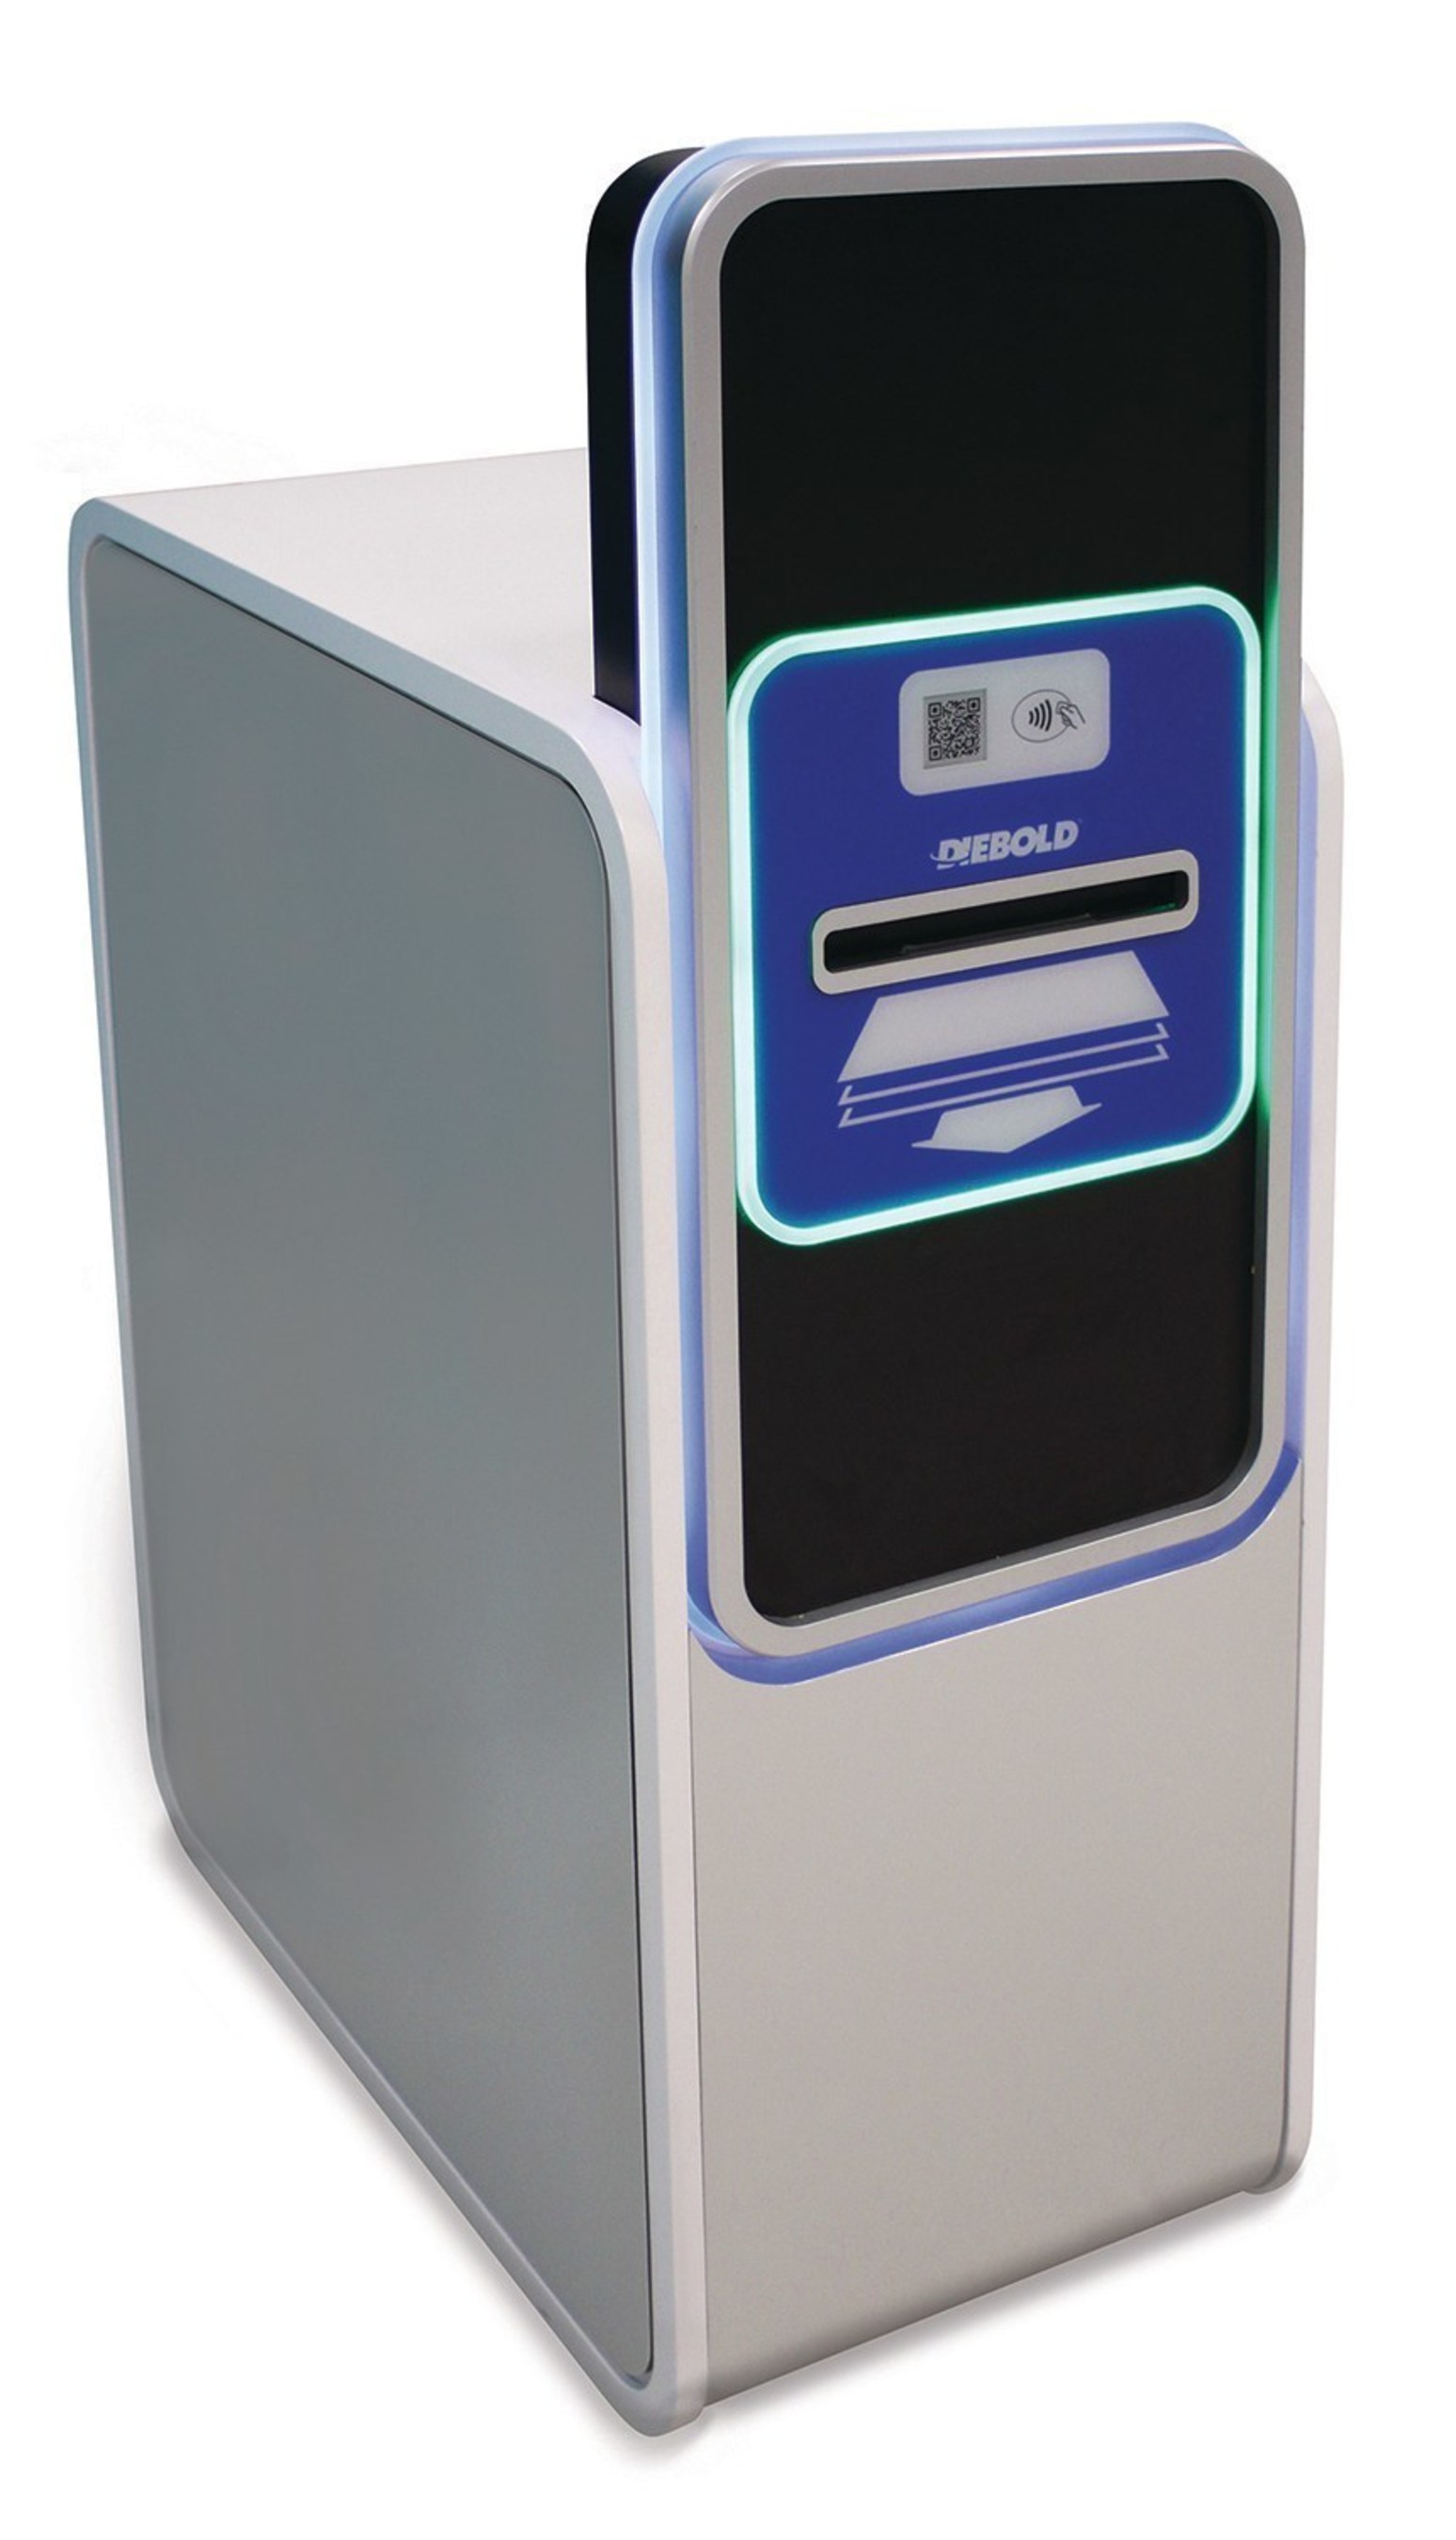 Diebold, Incorporated's screenless self-service Irving concept